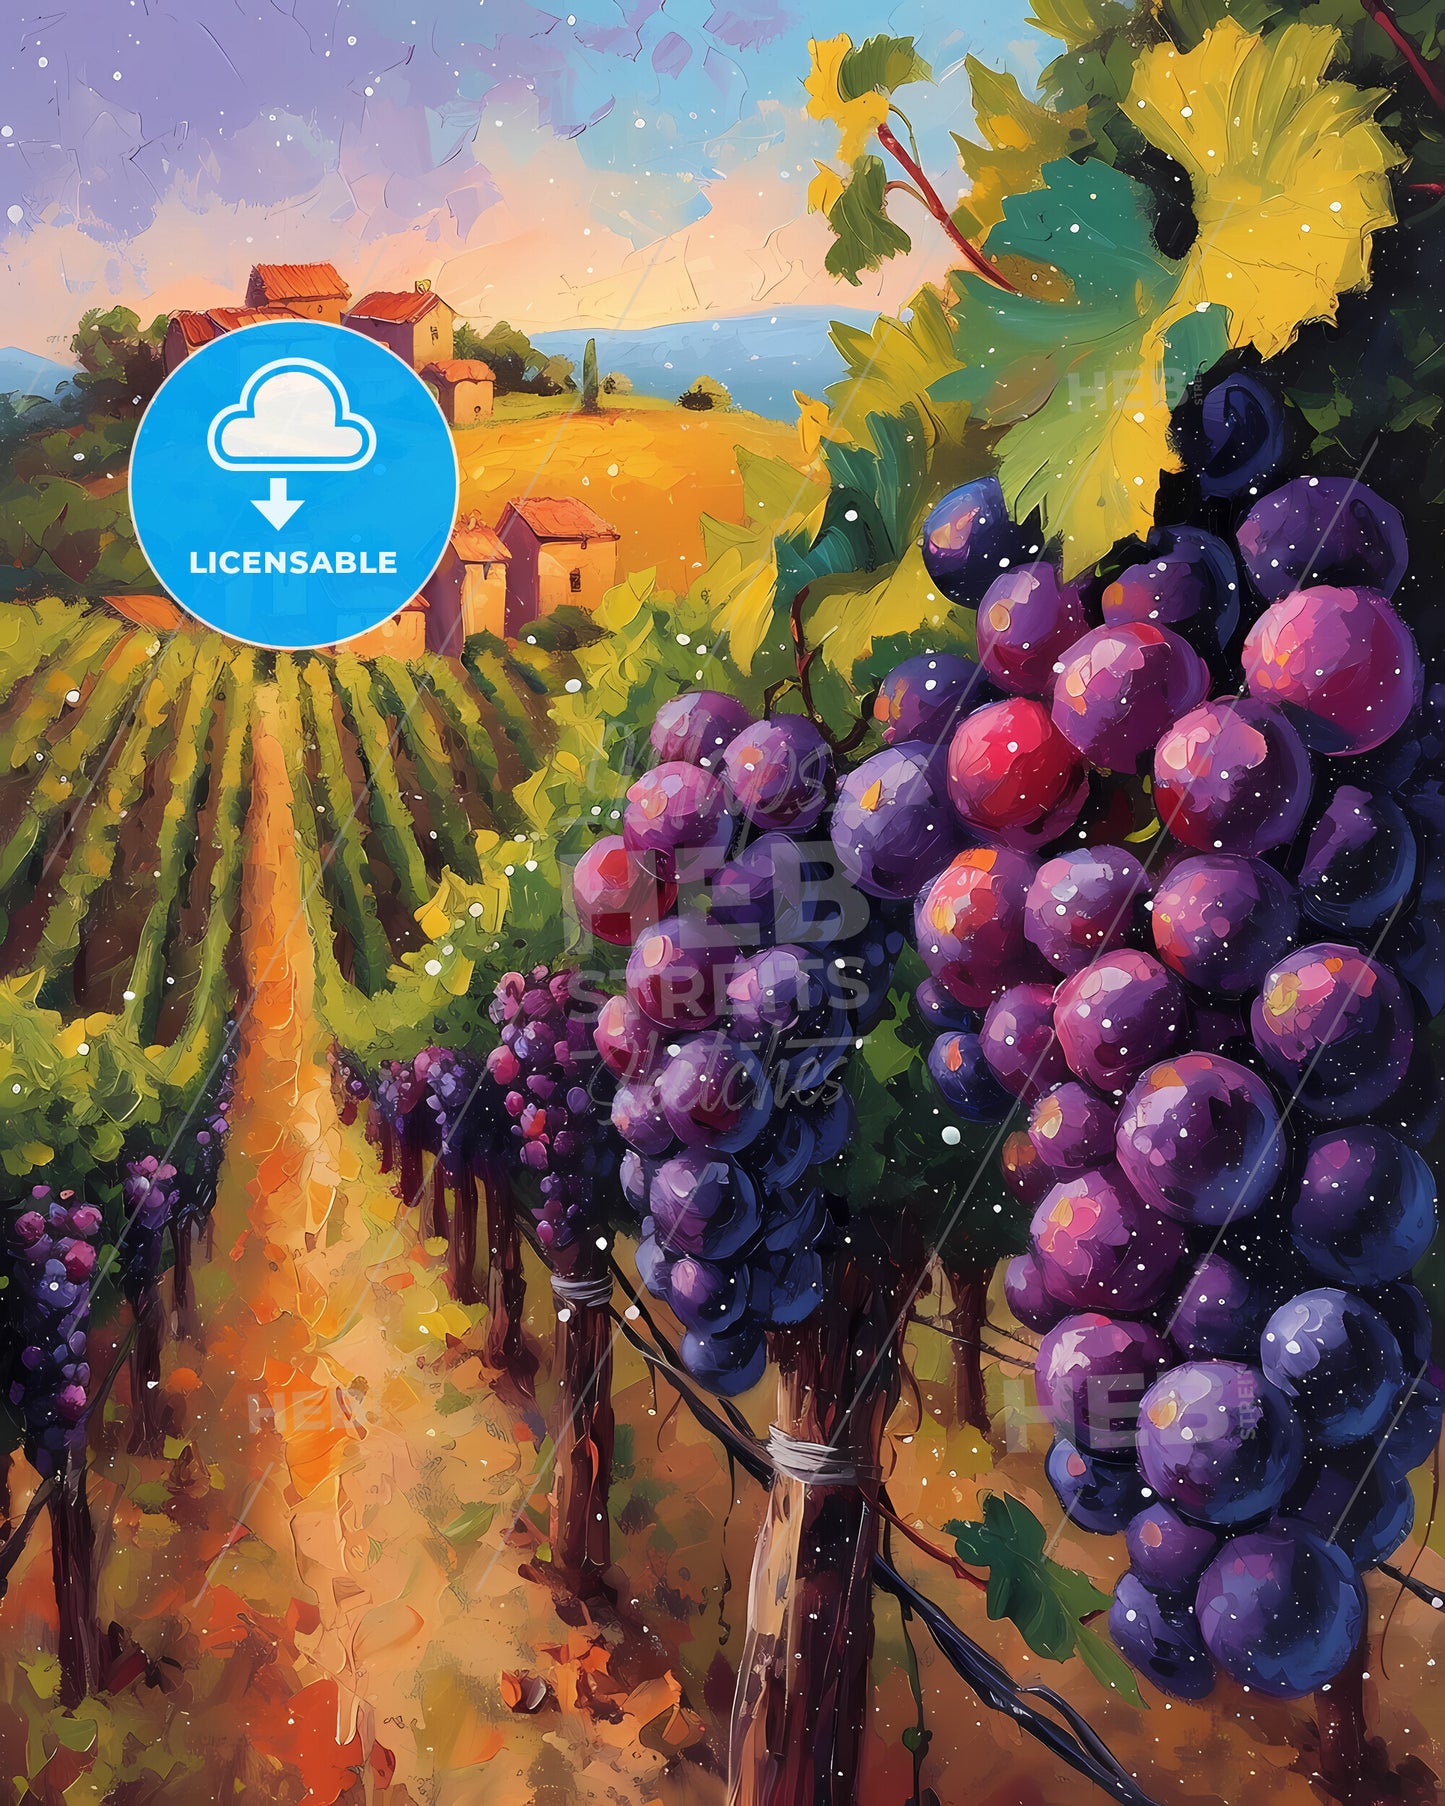 Bordeaux, France, Renowned For Its Red Blends - A Painting Of A Vineyard